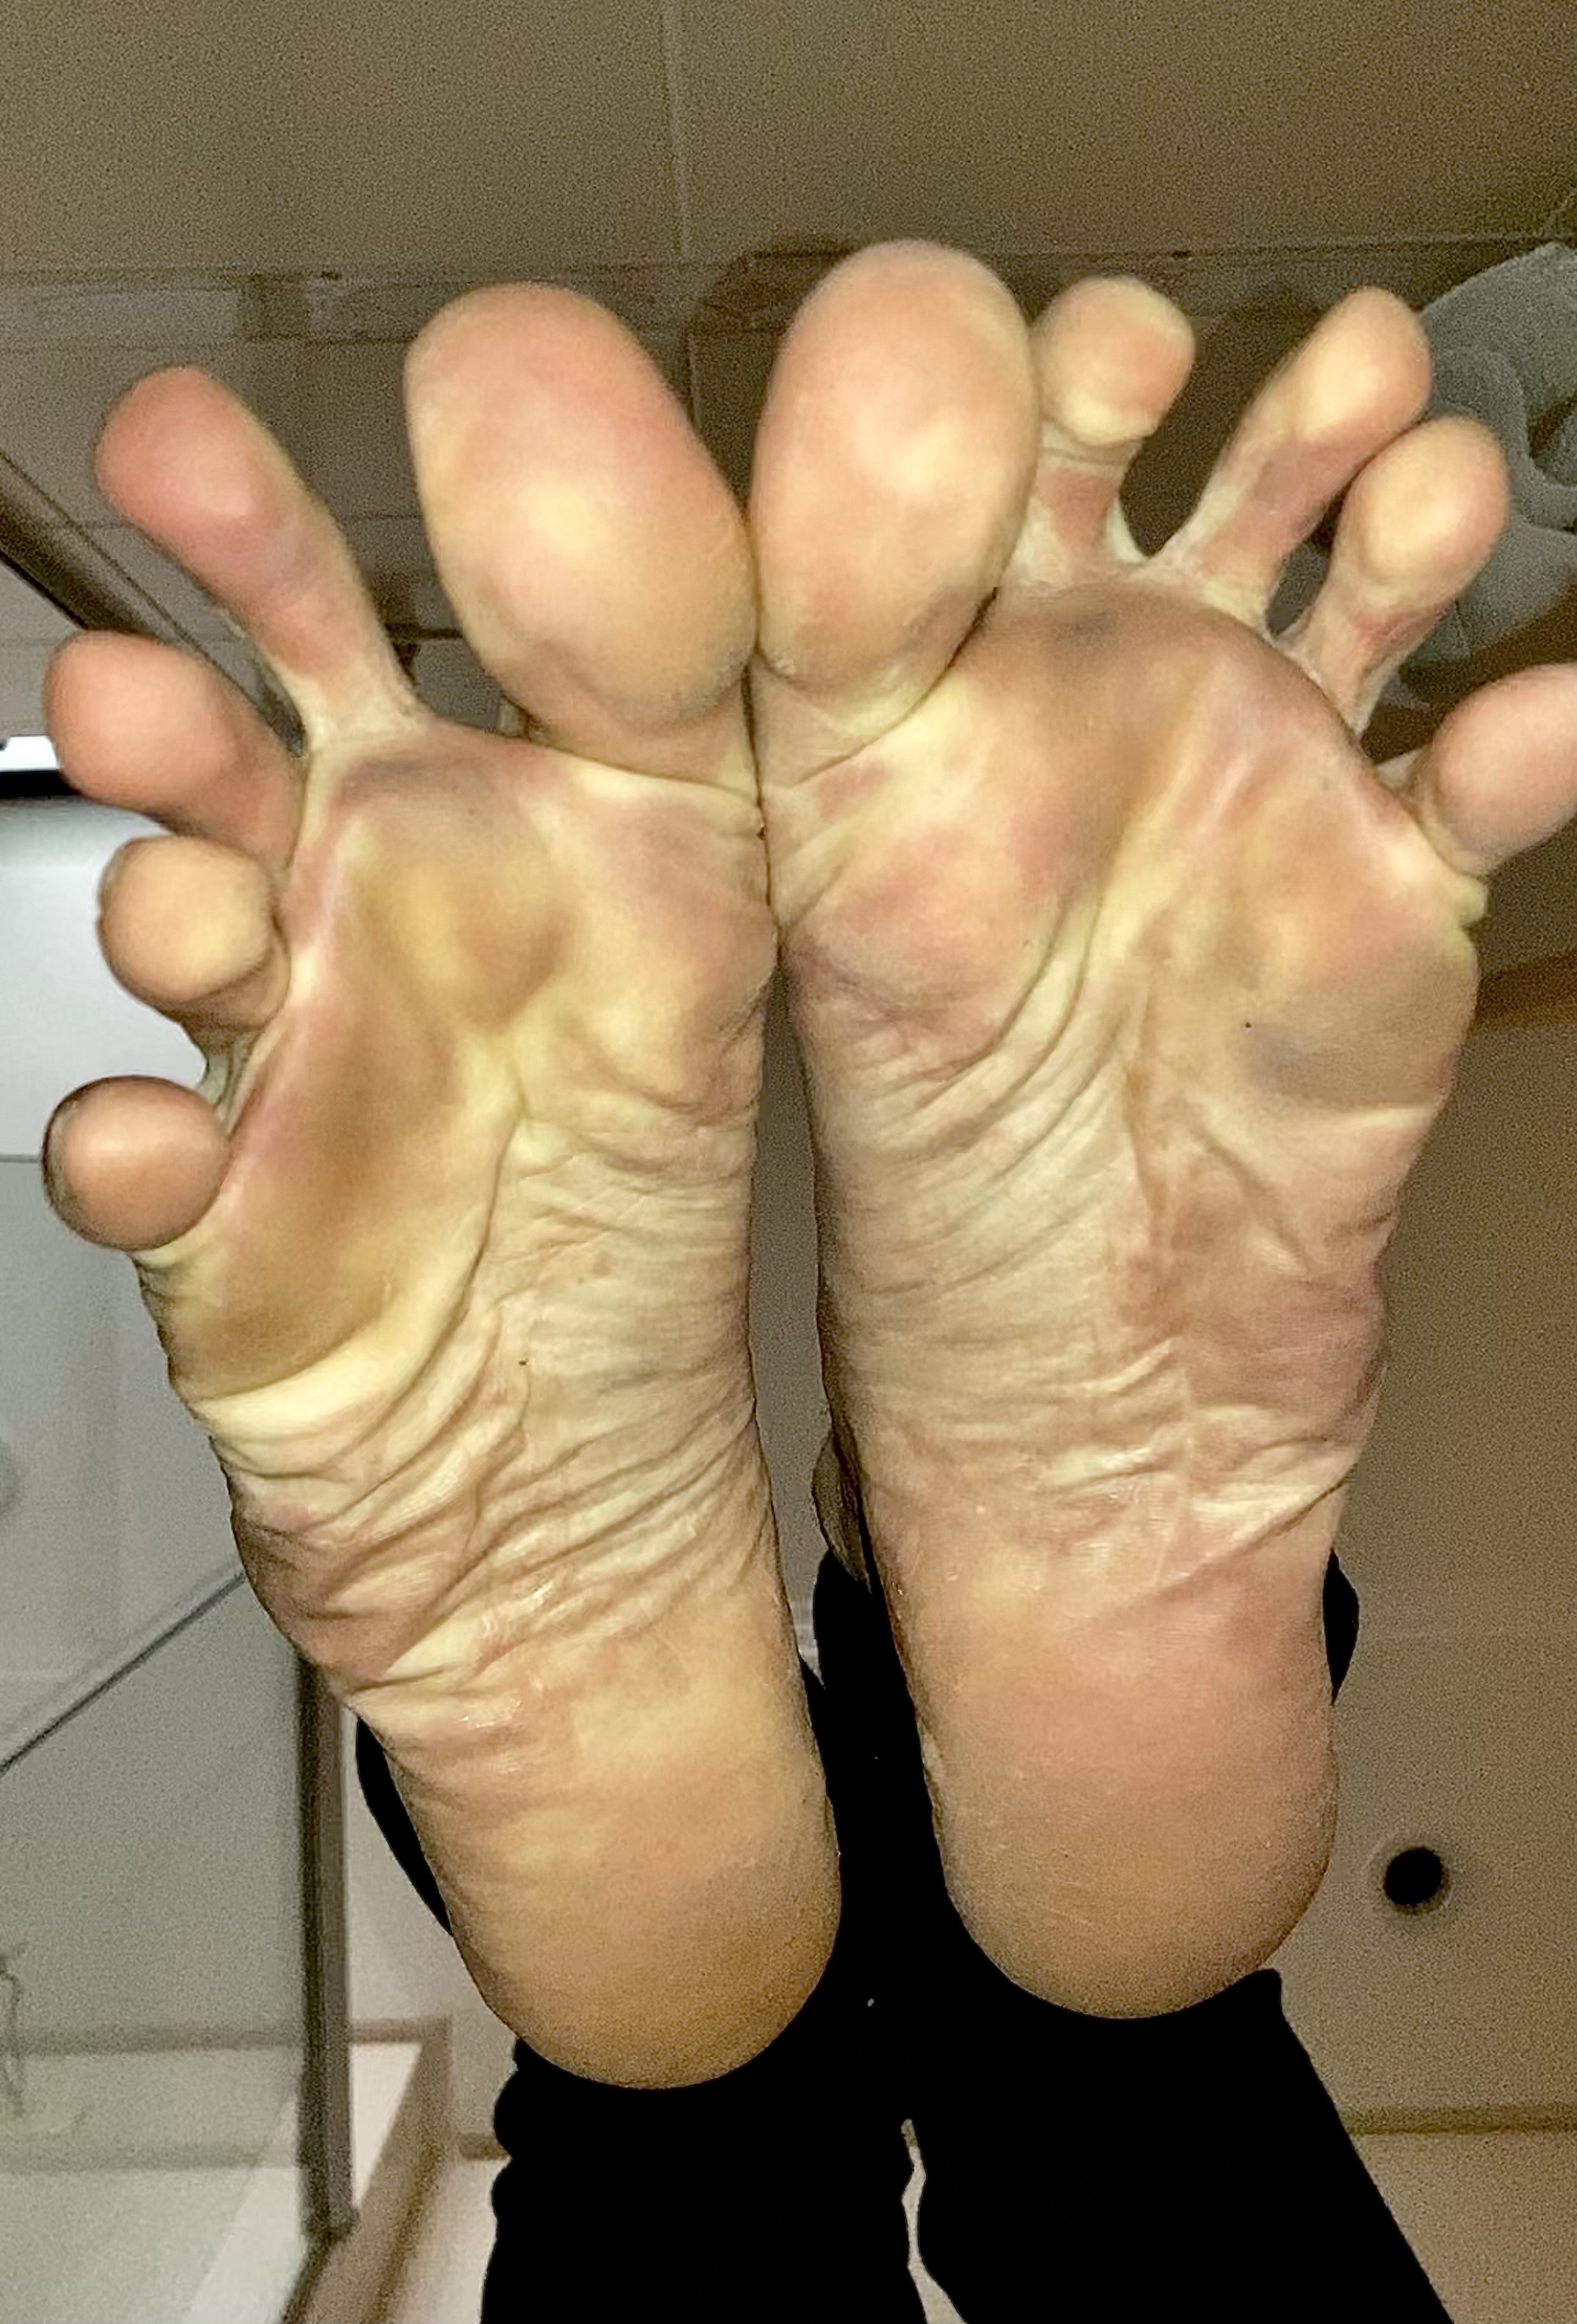 Male amateur smelly feet and soles